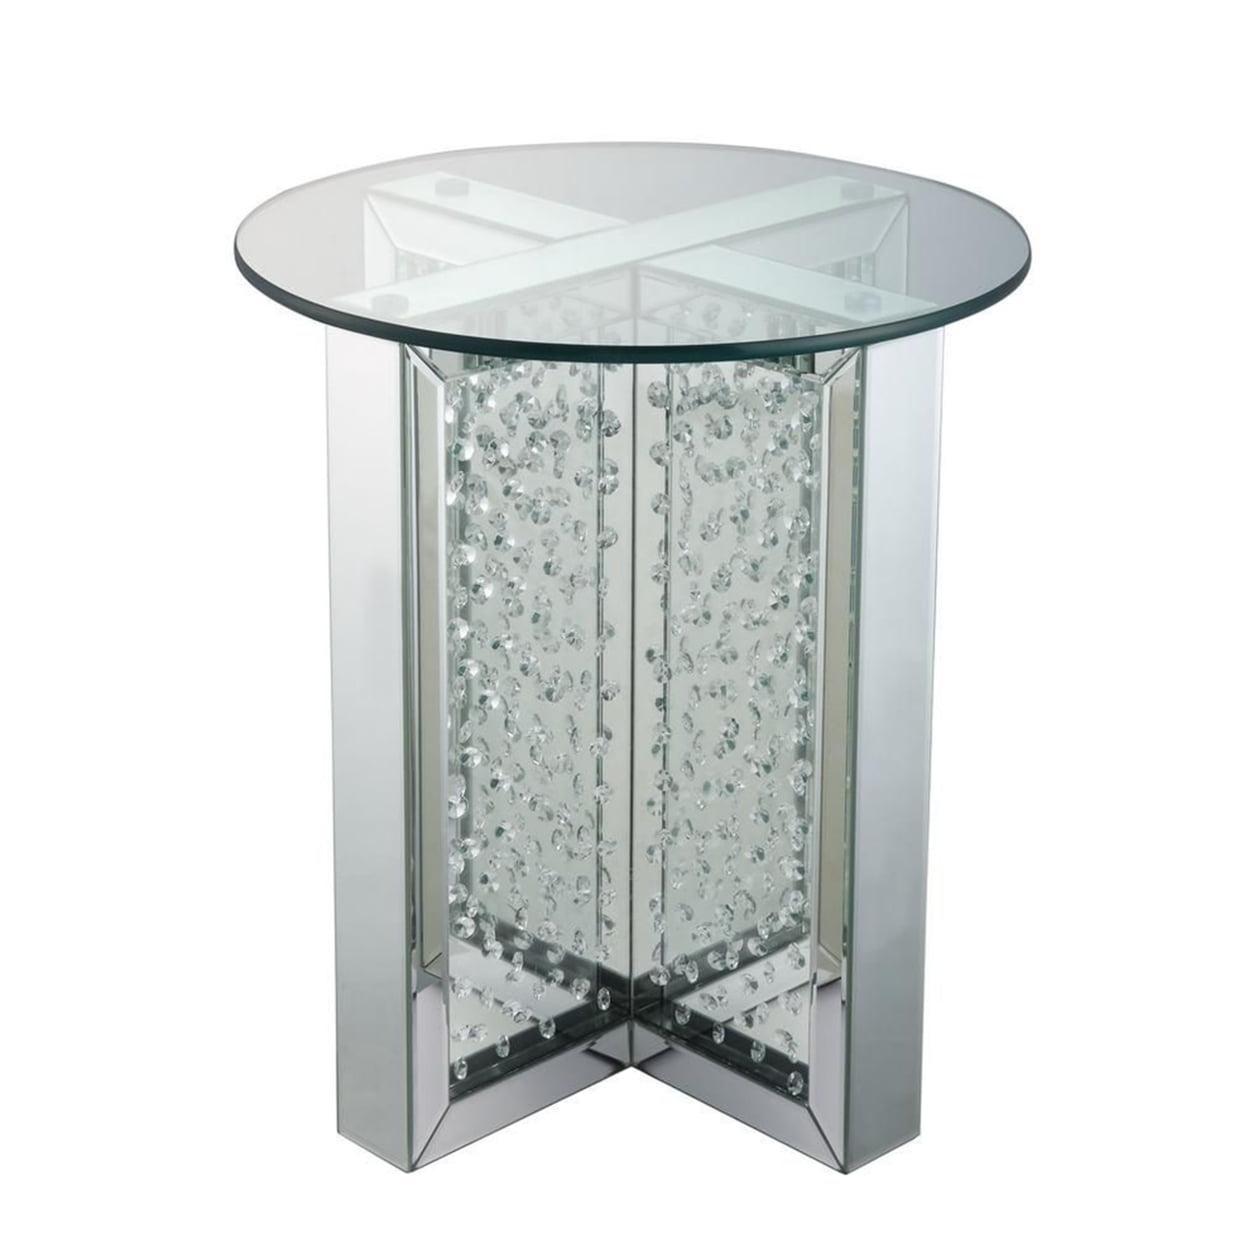 Lux Glam Round Mirrored End Table with Crystal Accents, Silver